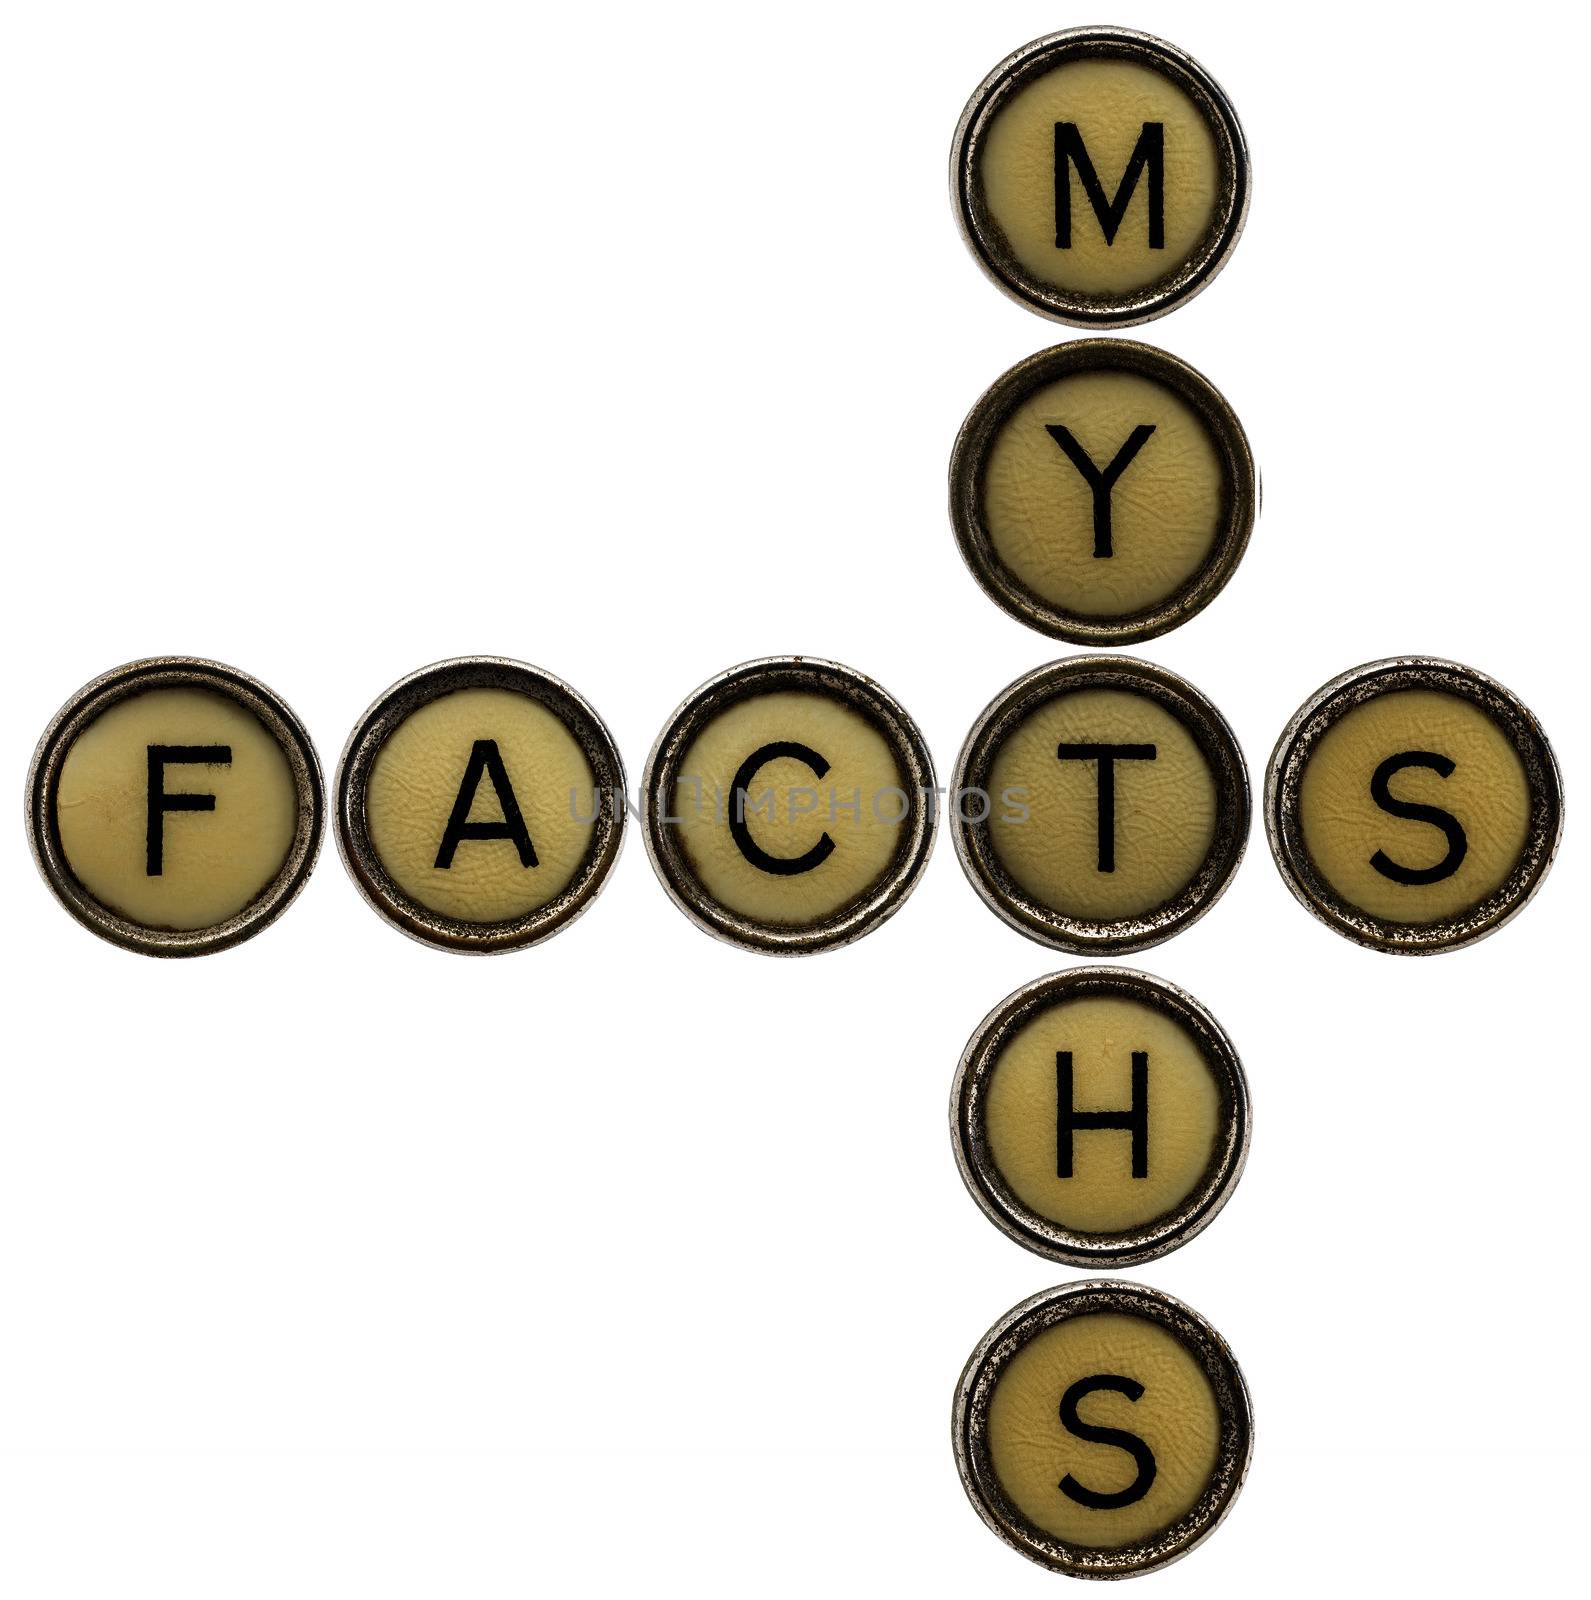 facts and myths crossword by PixelsAway